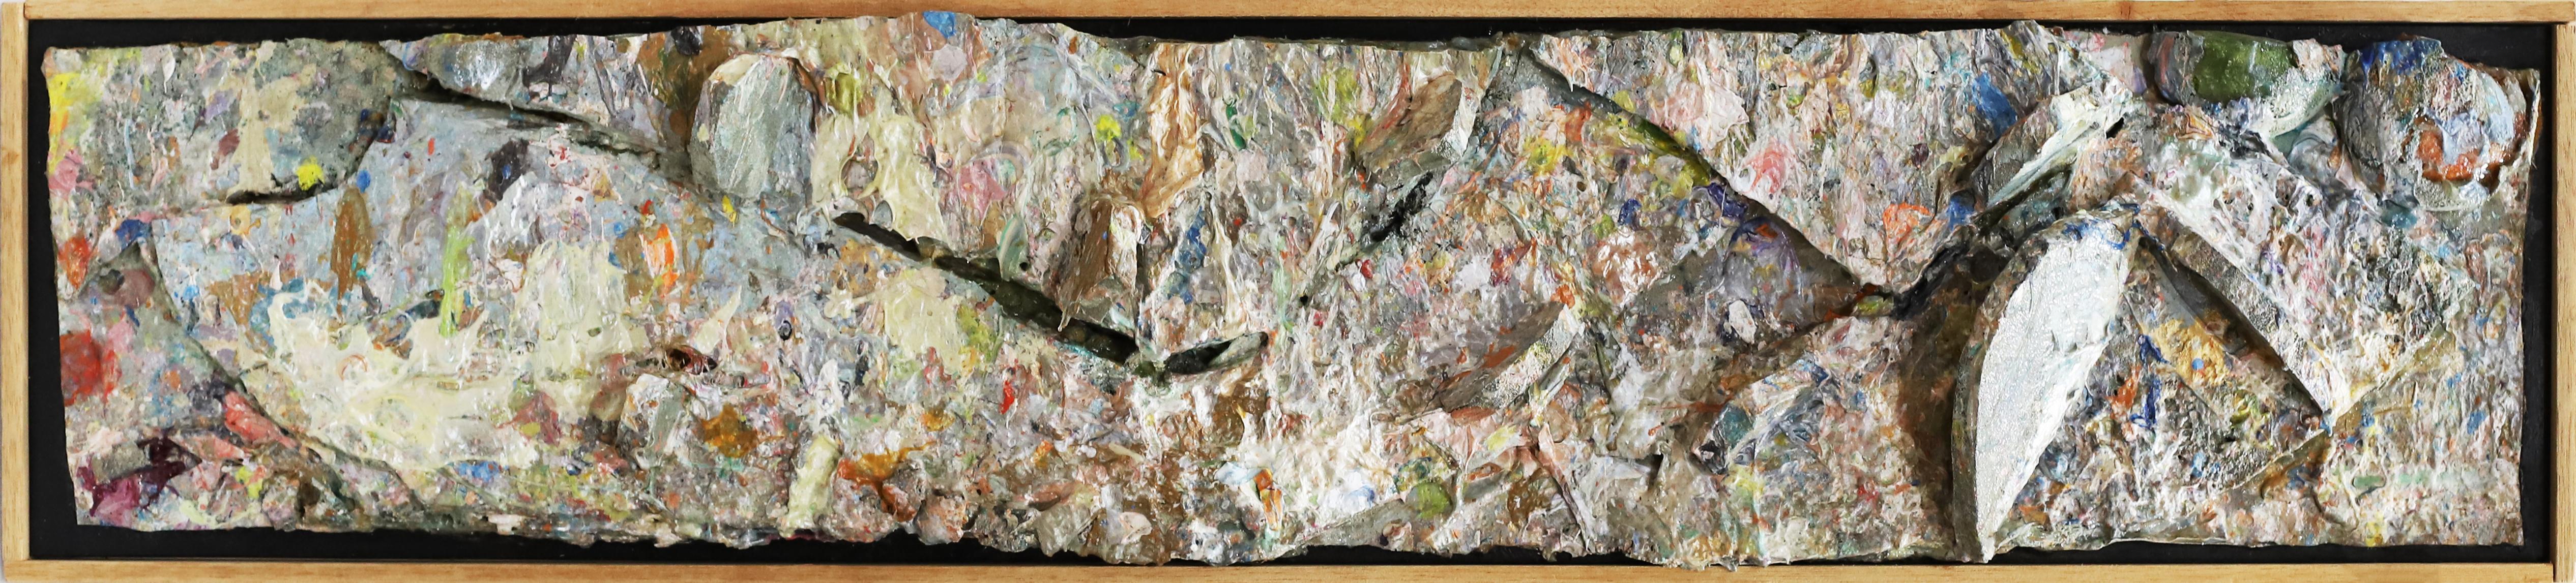 Larry Poons Abstract Painting -  89AS-1